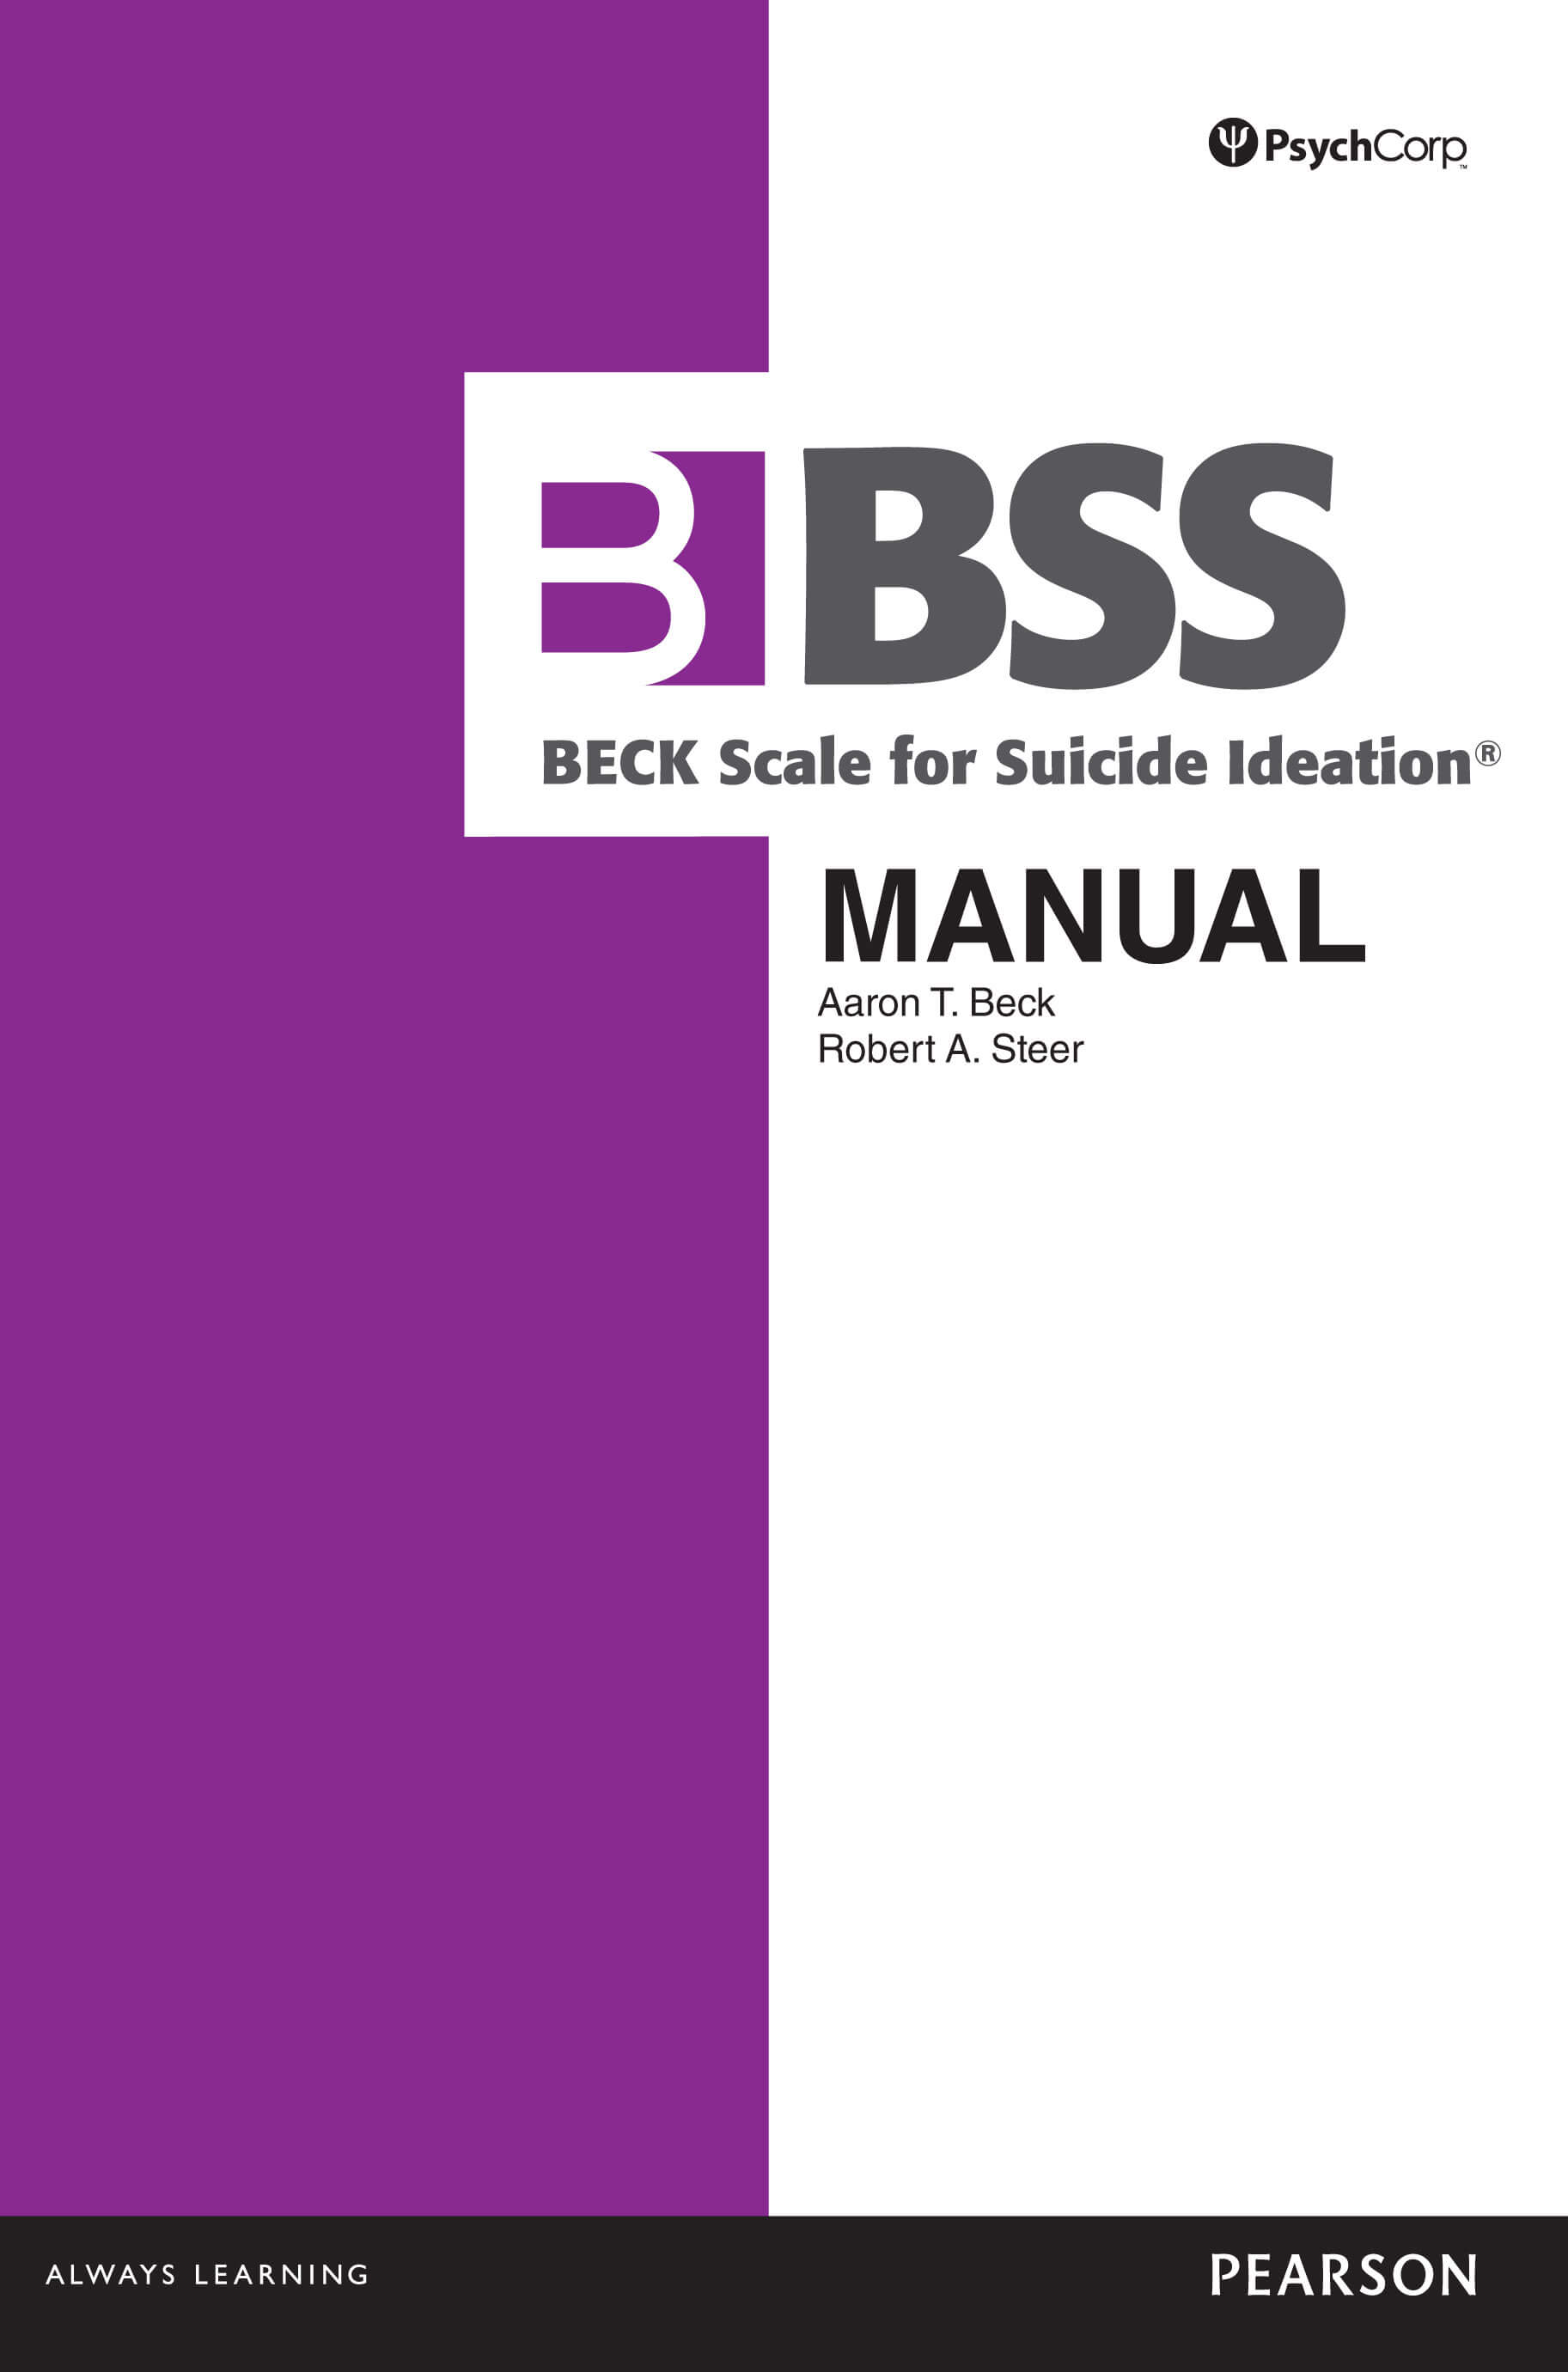 Beck Scale for Suicide Ideation (BSS) - 